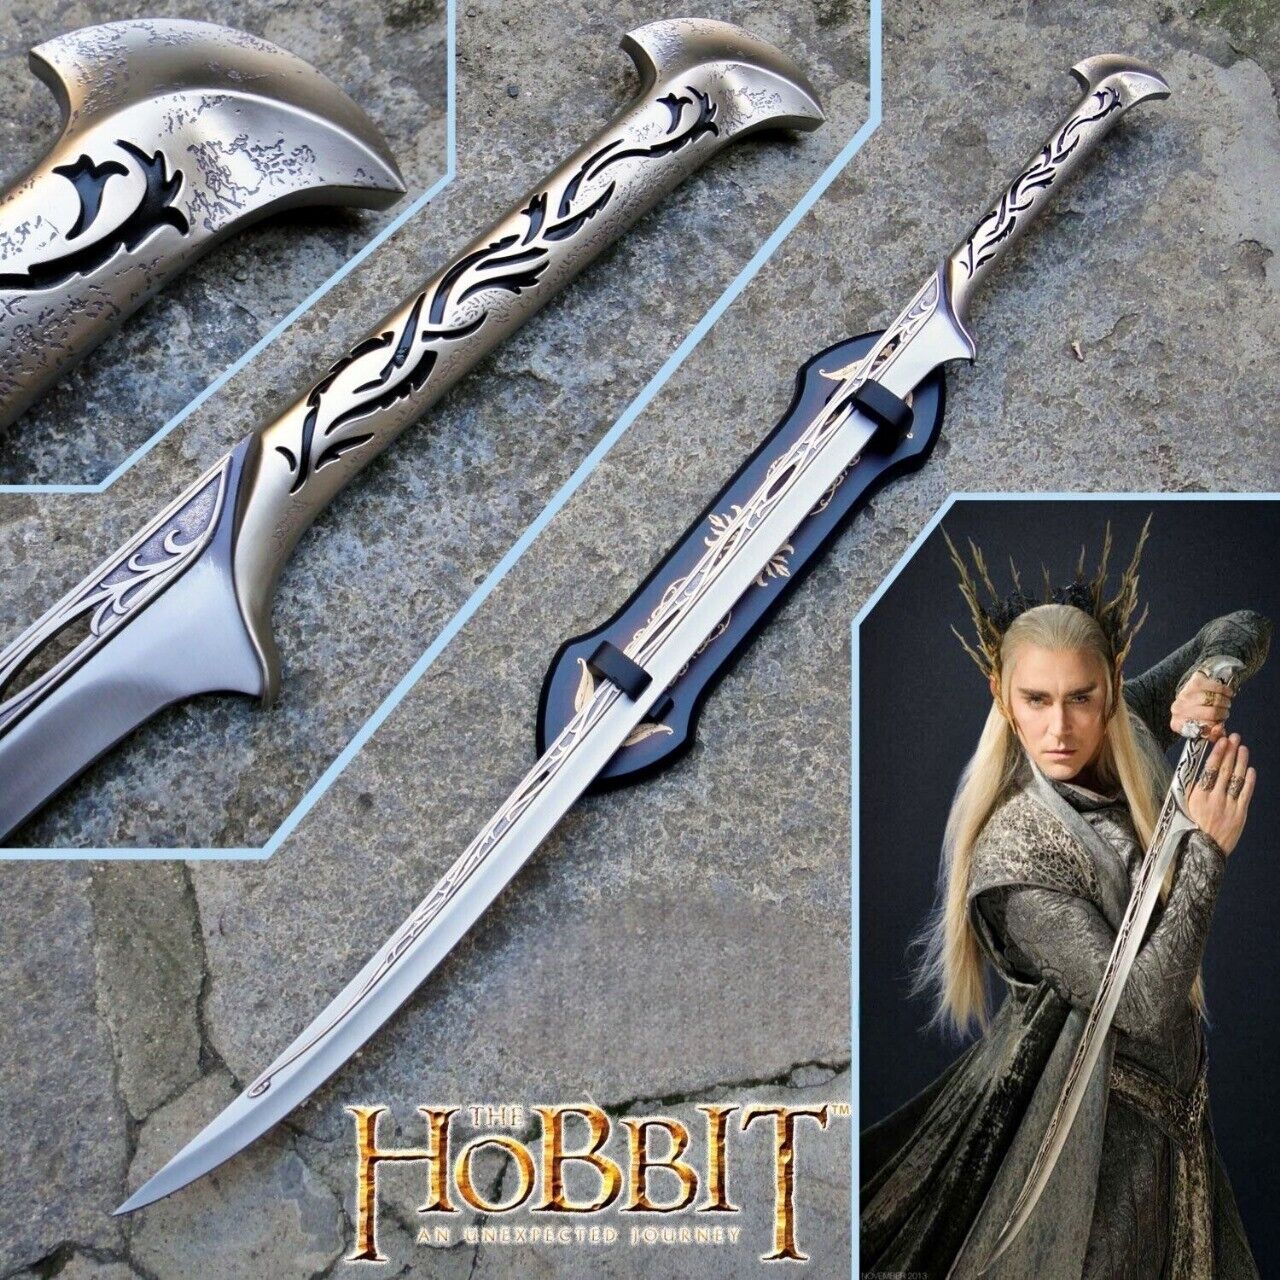 The Thranduil Sword REPLICA - THE HOBBIT ELVEN KING Sword from Lord of The Rings